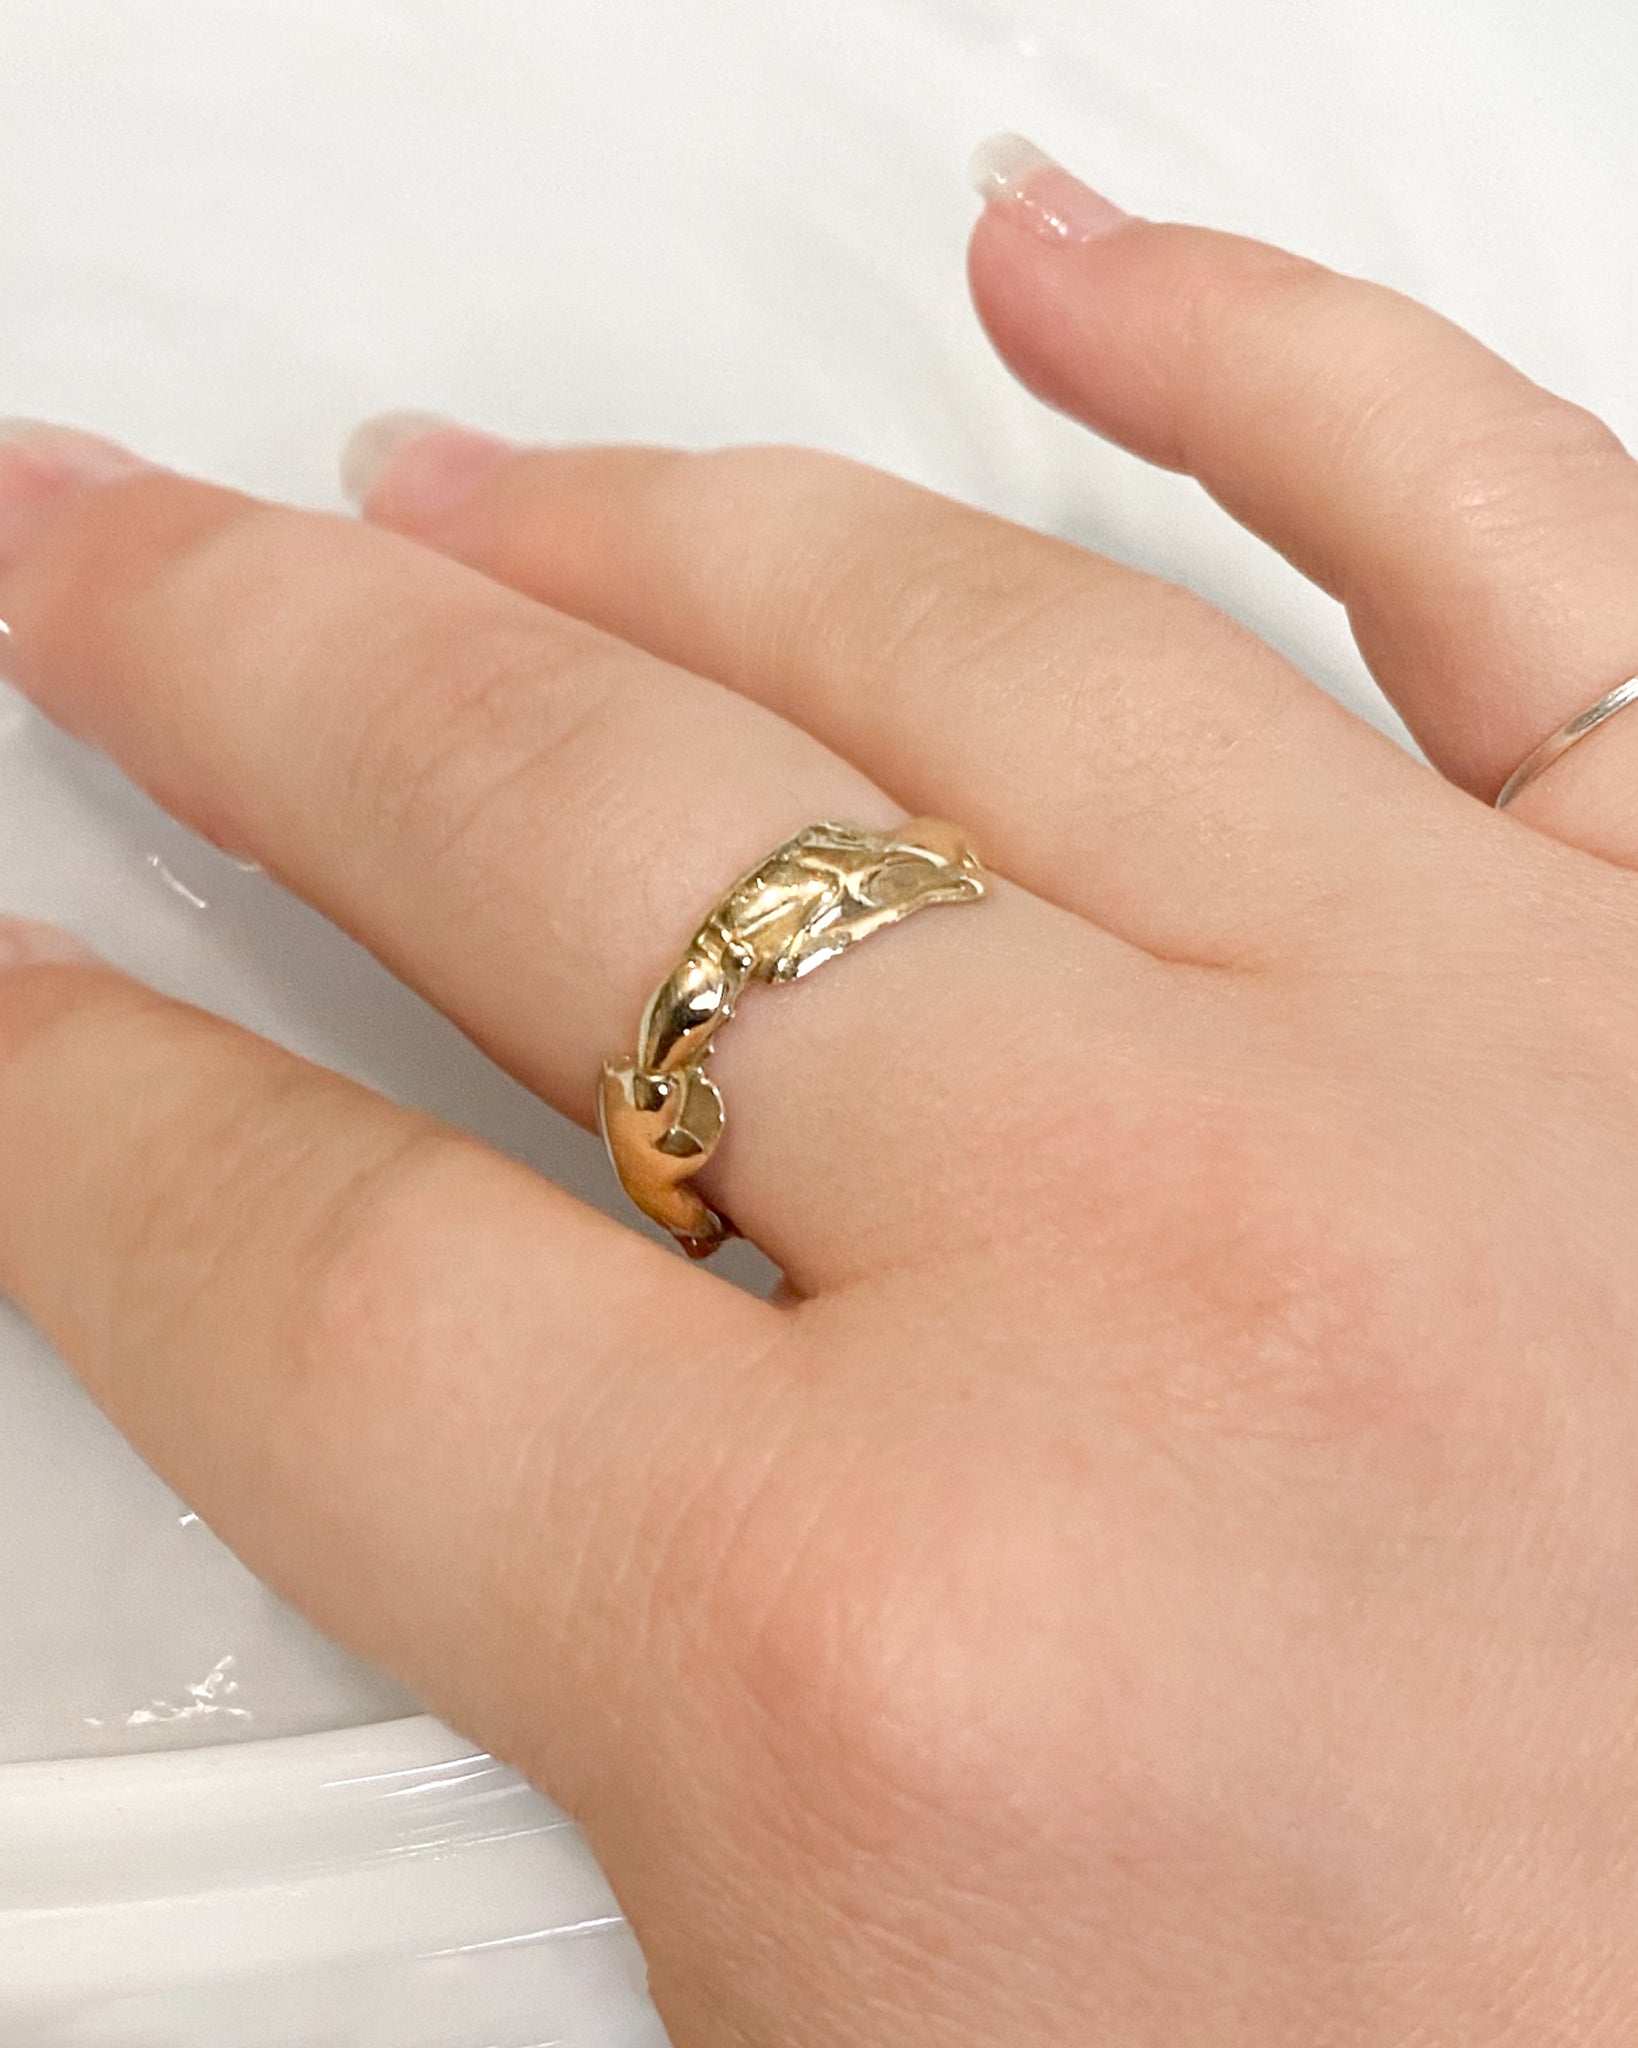 Gold molten ring on hand